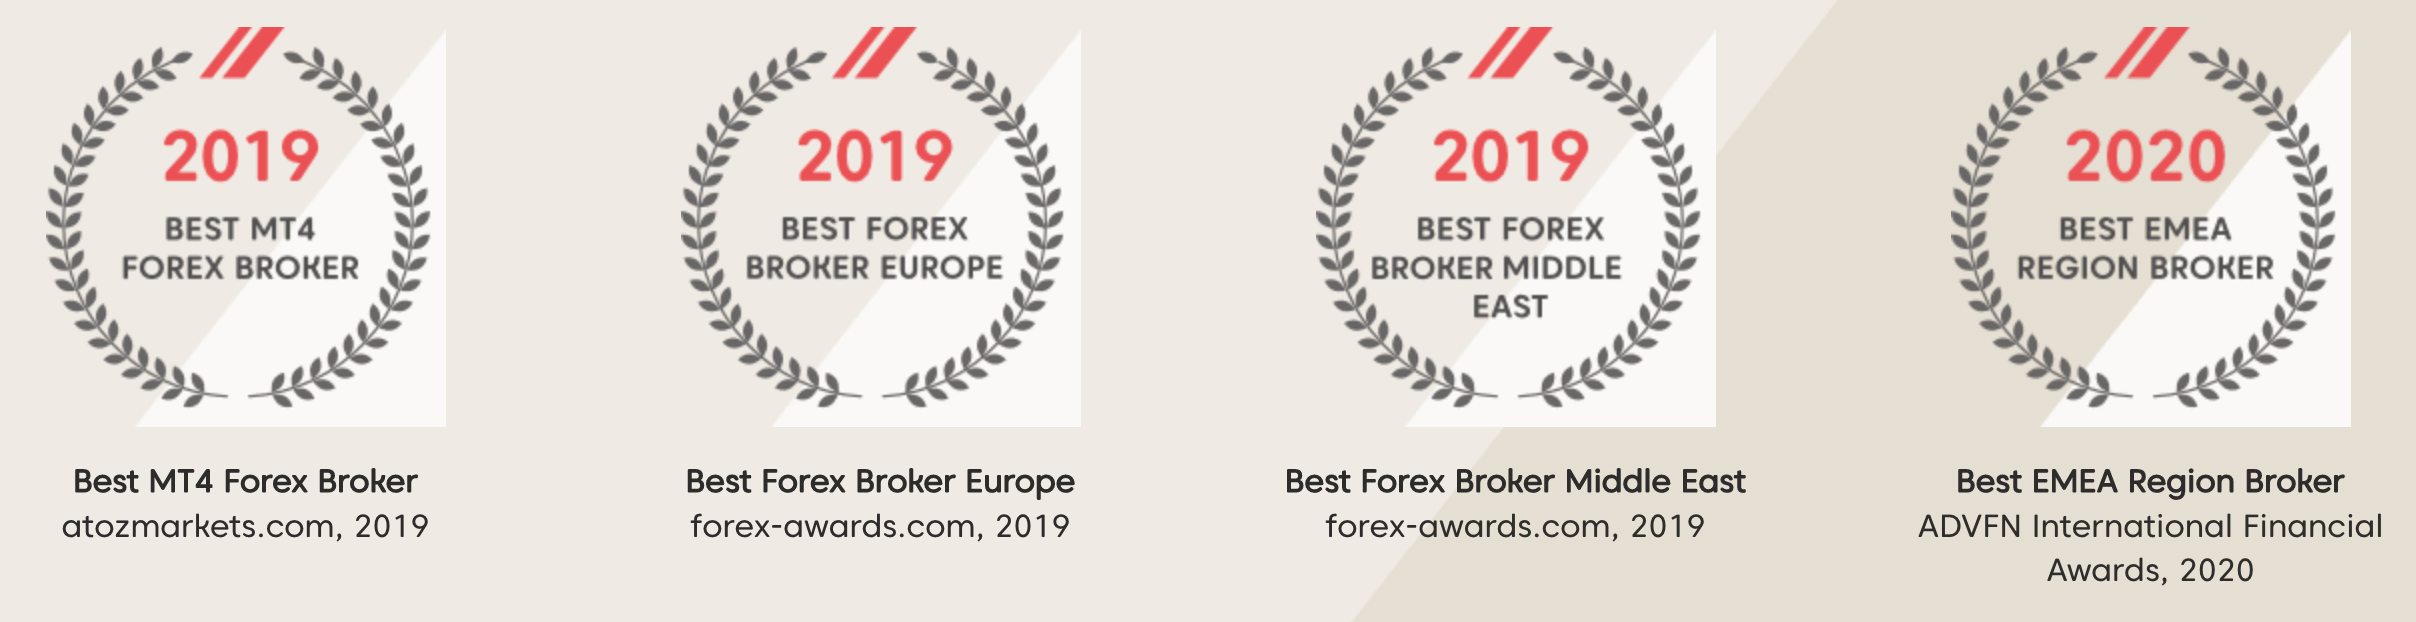 AxiTrader has been awarded with many different awards